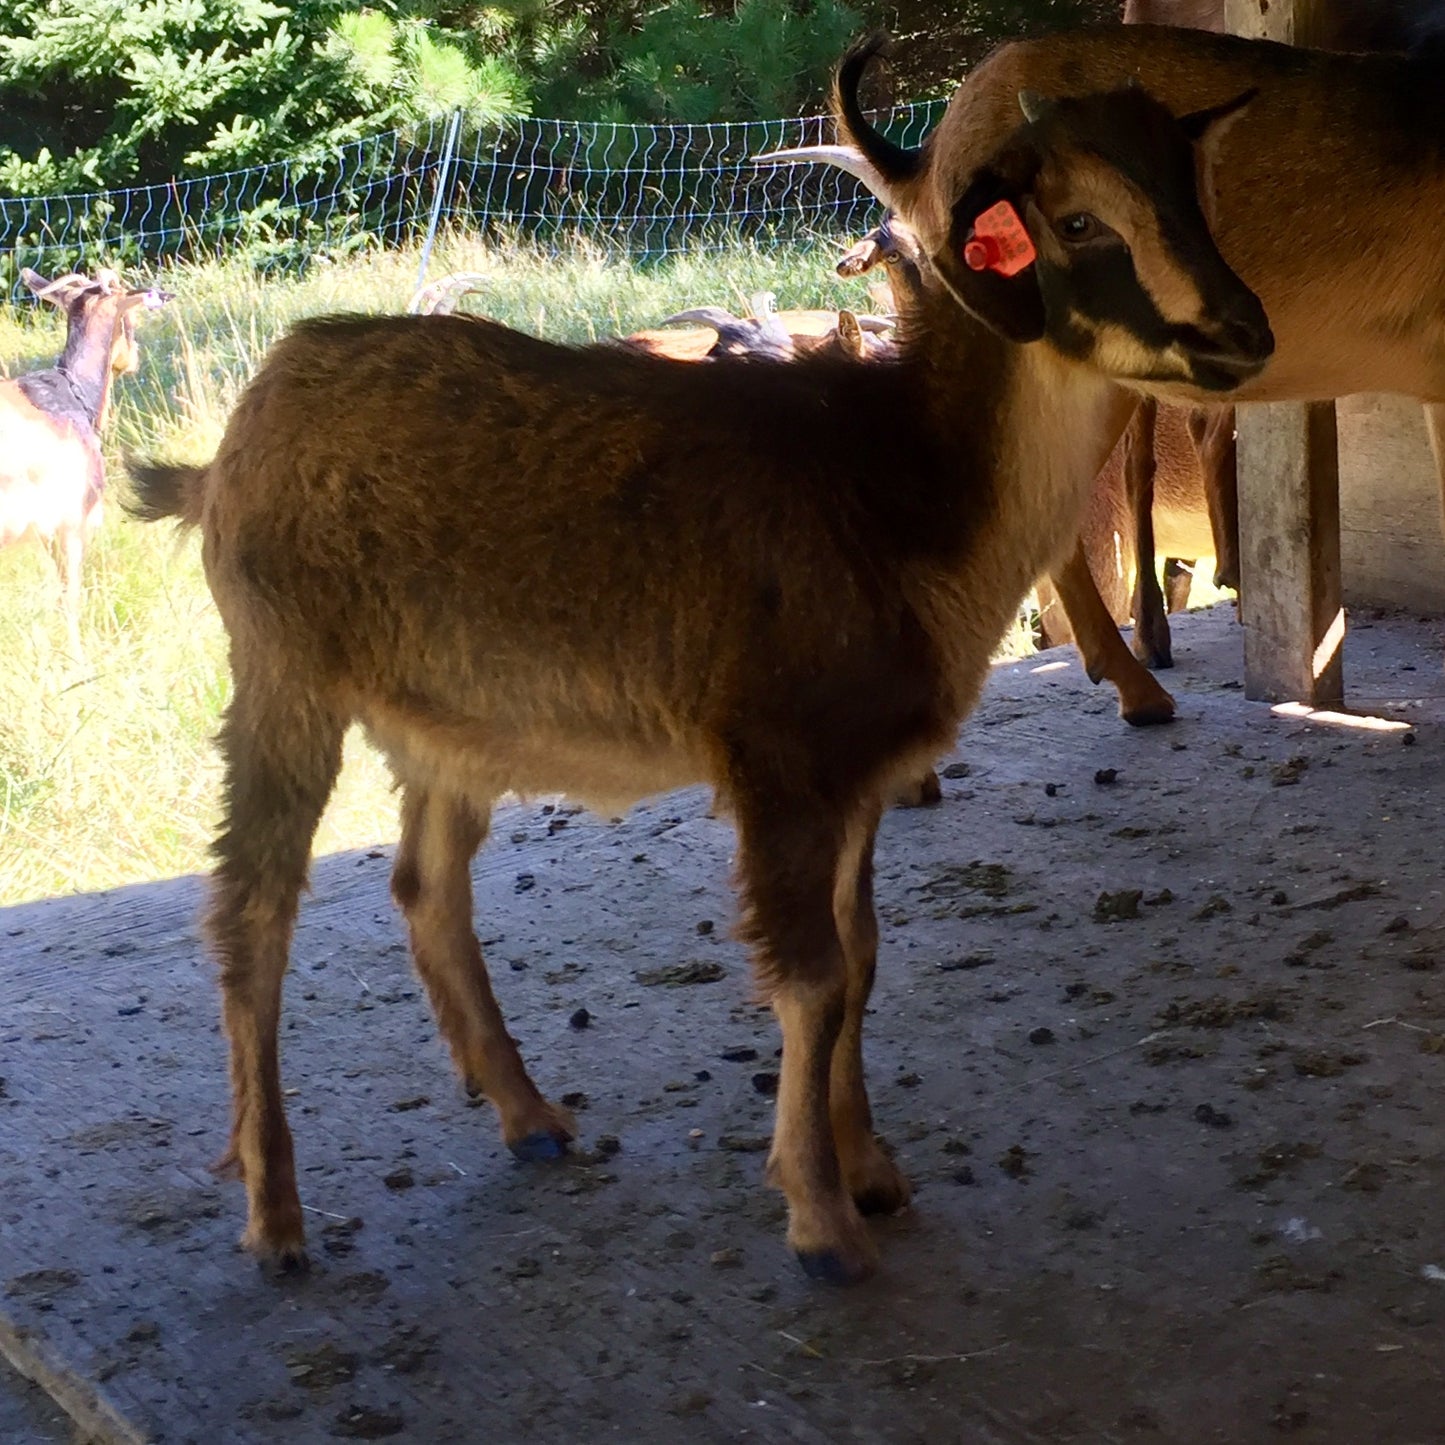 san clemente island goat, sci goat, pure sci goat, san clemene island goats for sale, goats for sale, wisconsin goats, wisconsin san clemente island goats, rare breed goat, critically endangered goat, eb ranch farmstead